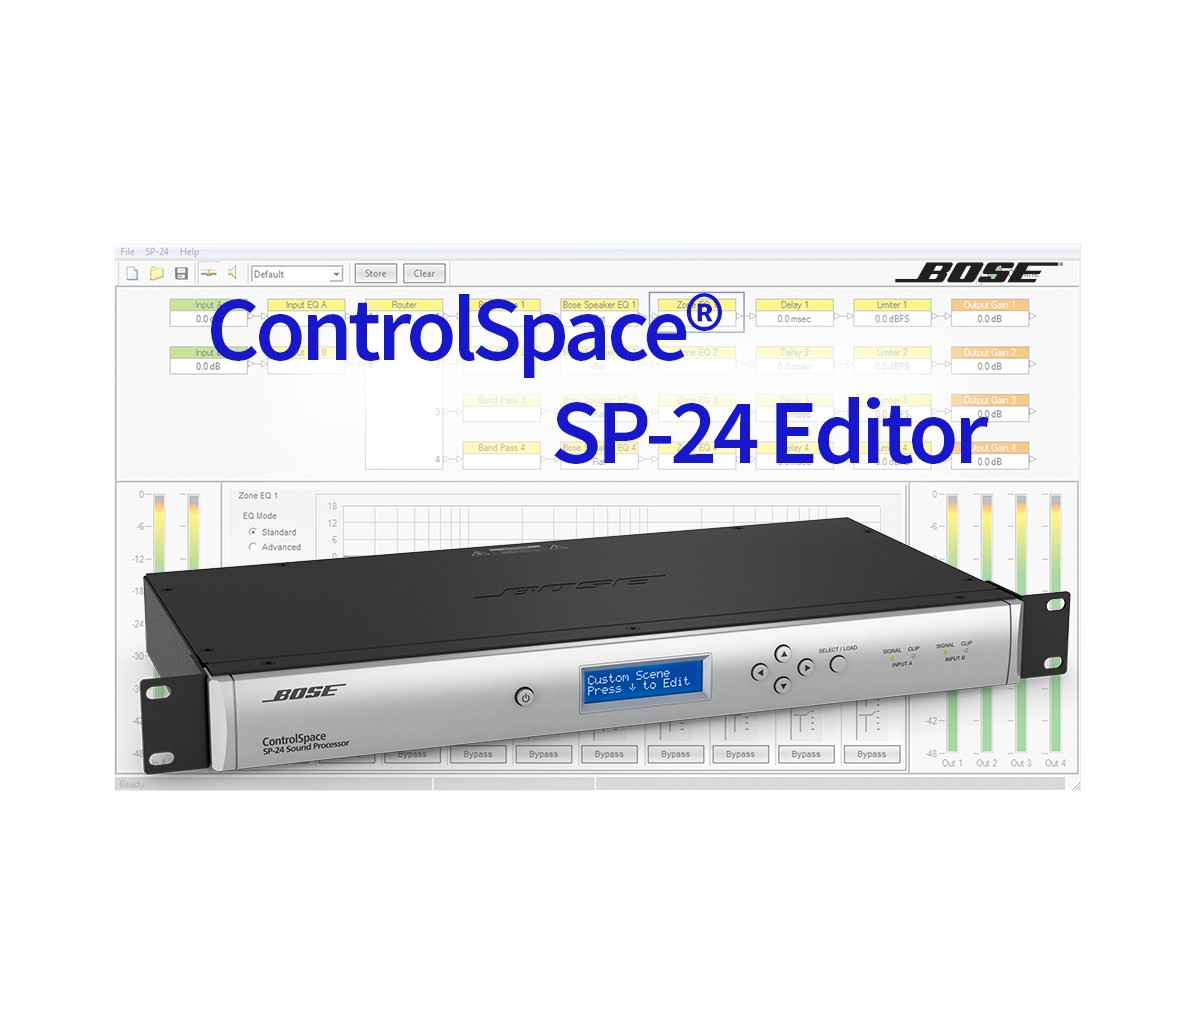 ControlSpace SP-24 Editor software